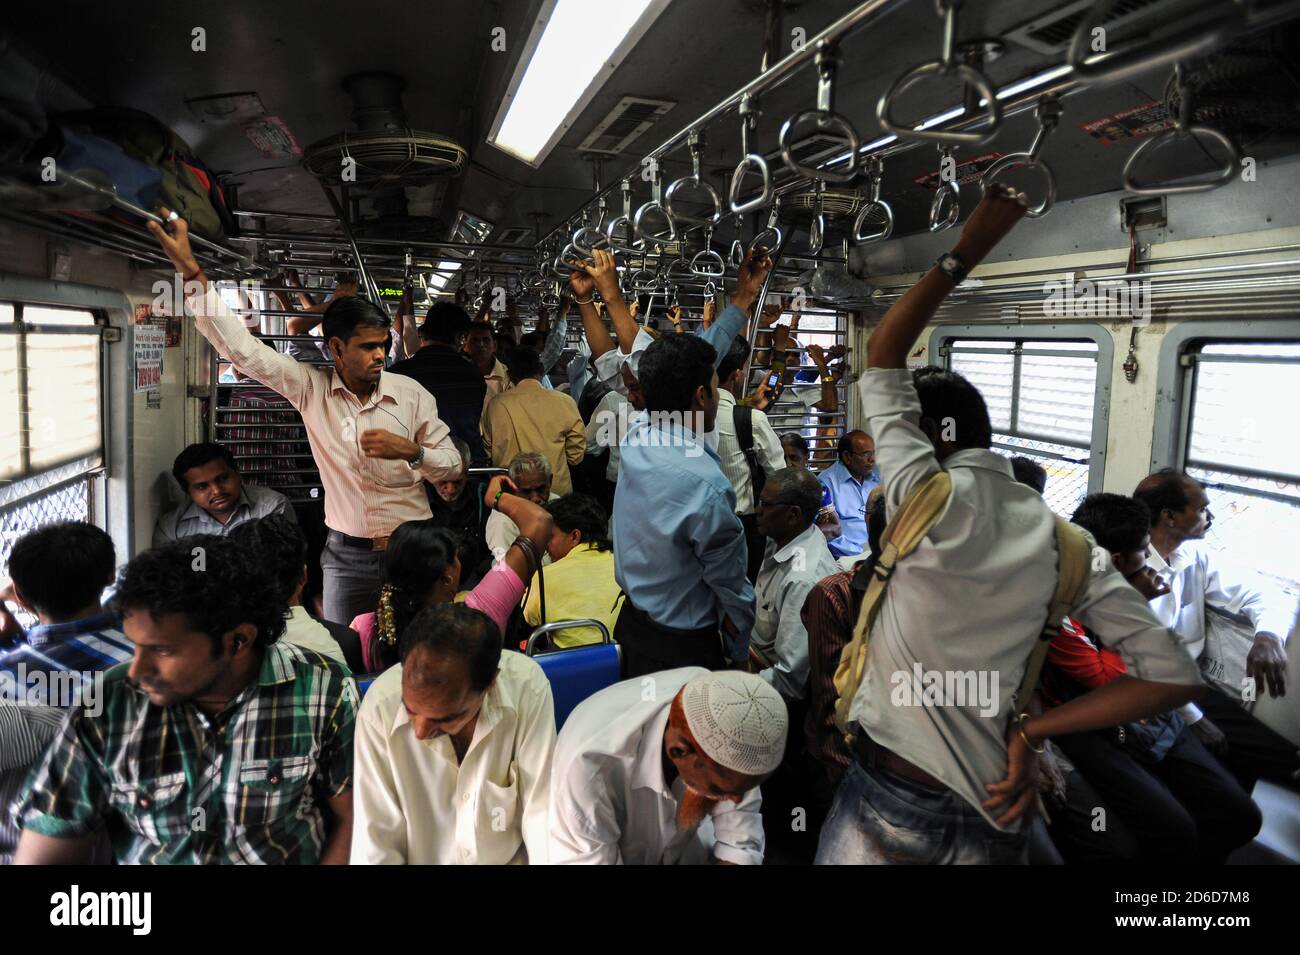 08.12.2011, Mumbai, Maharashtra, India - Commuters during rush hour on a completely overcrowded commuter train that connects the center of the Indian Stock Photo